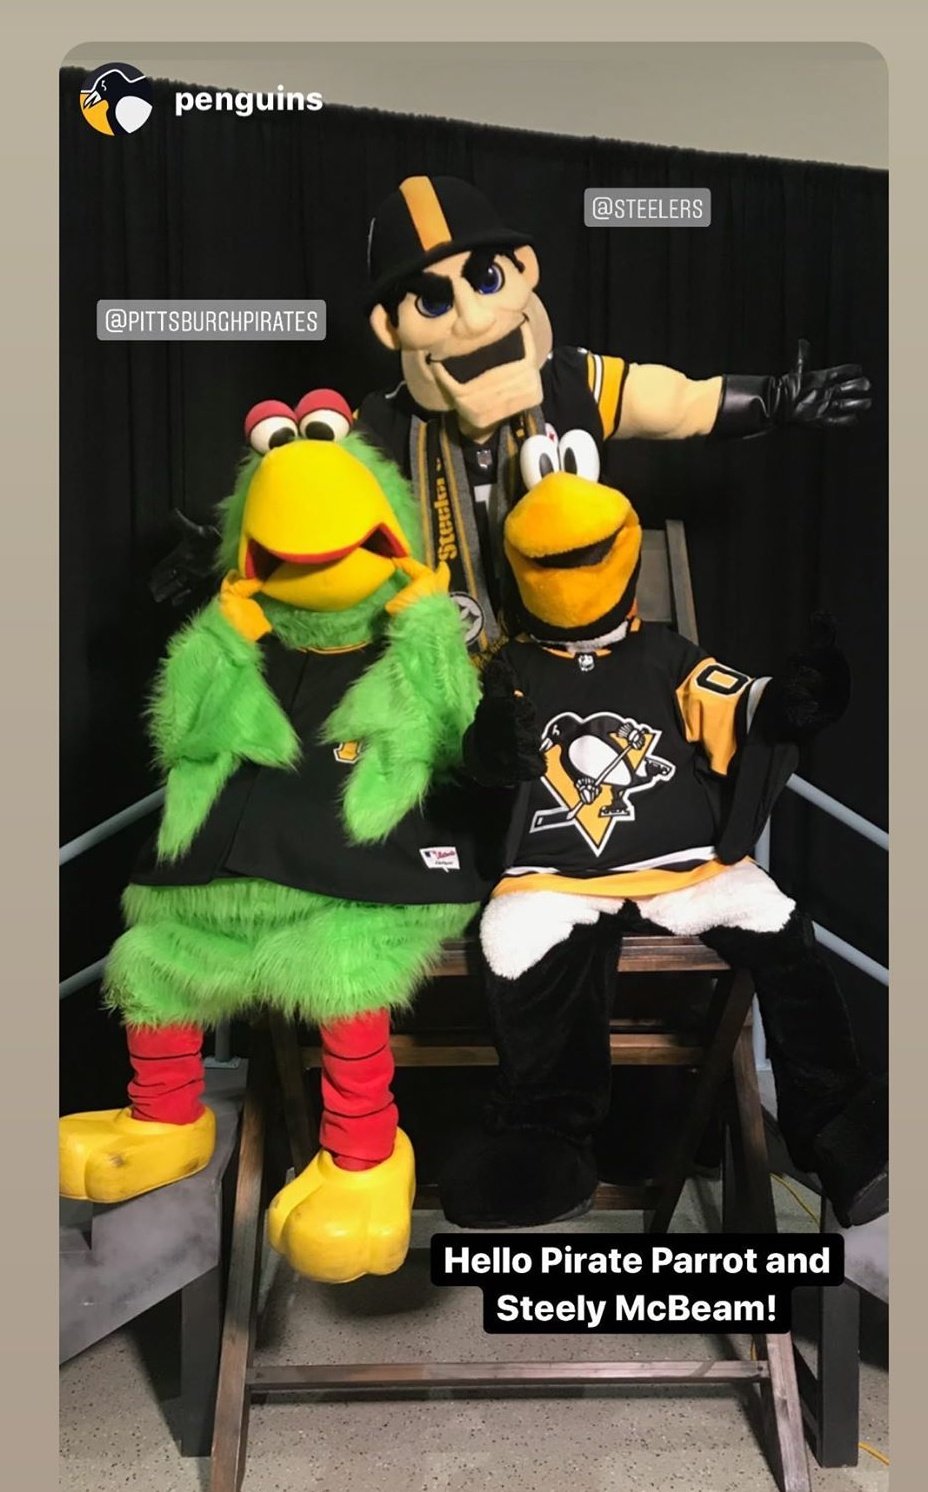 The Pirate Parrot (@Pirate_Parrot) / X